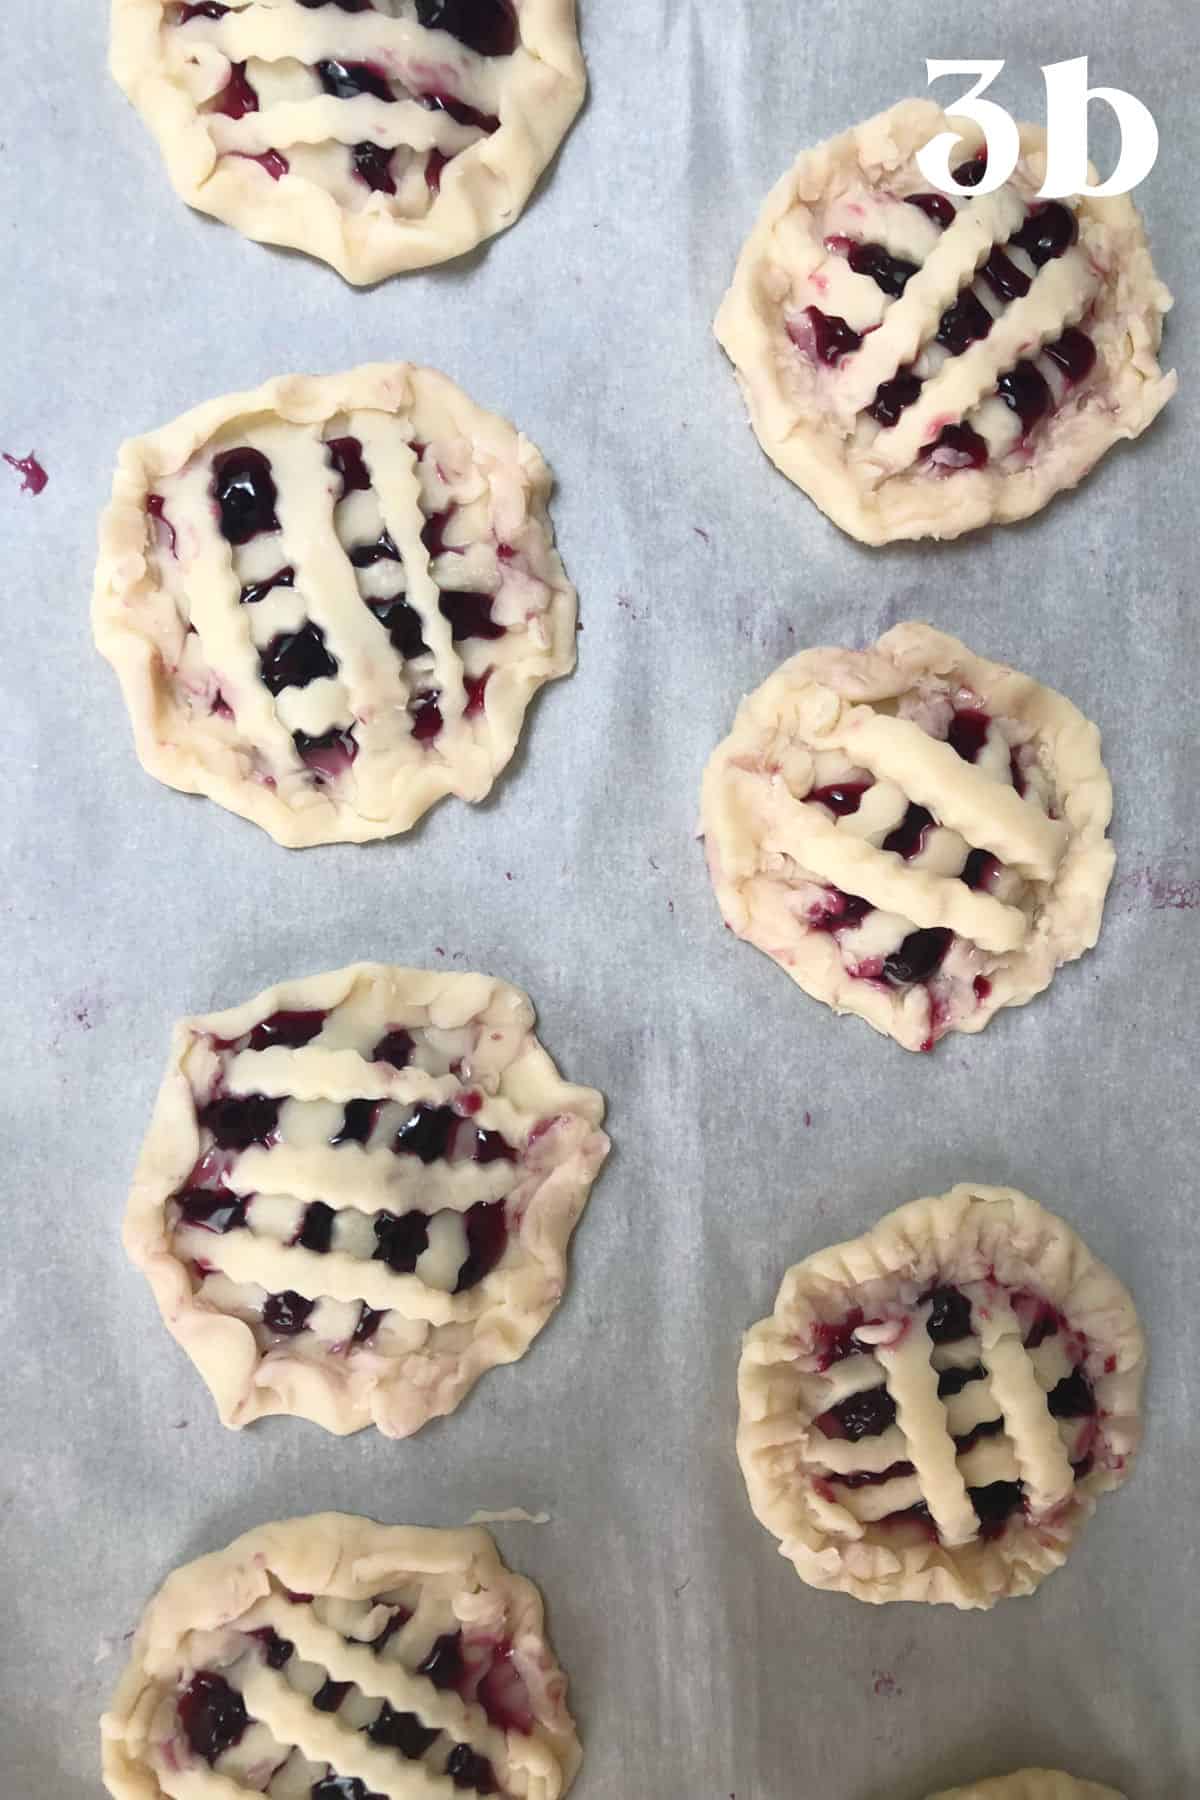 How to Make Blueberry Hand Pies Step 3B - adding little lattices to hand pies.